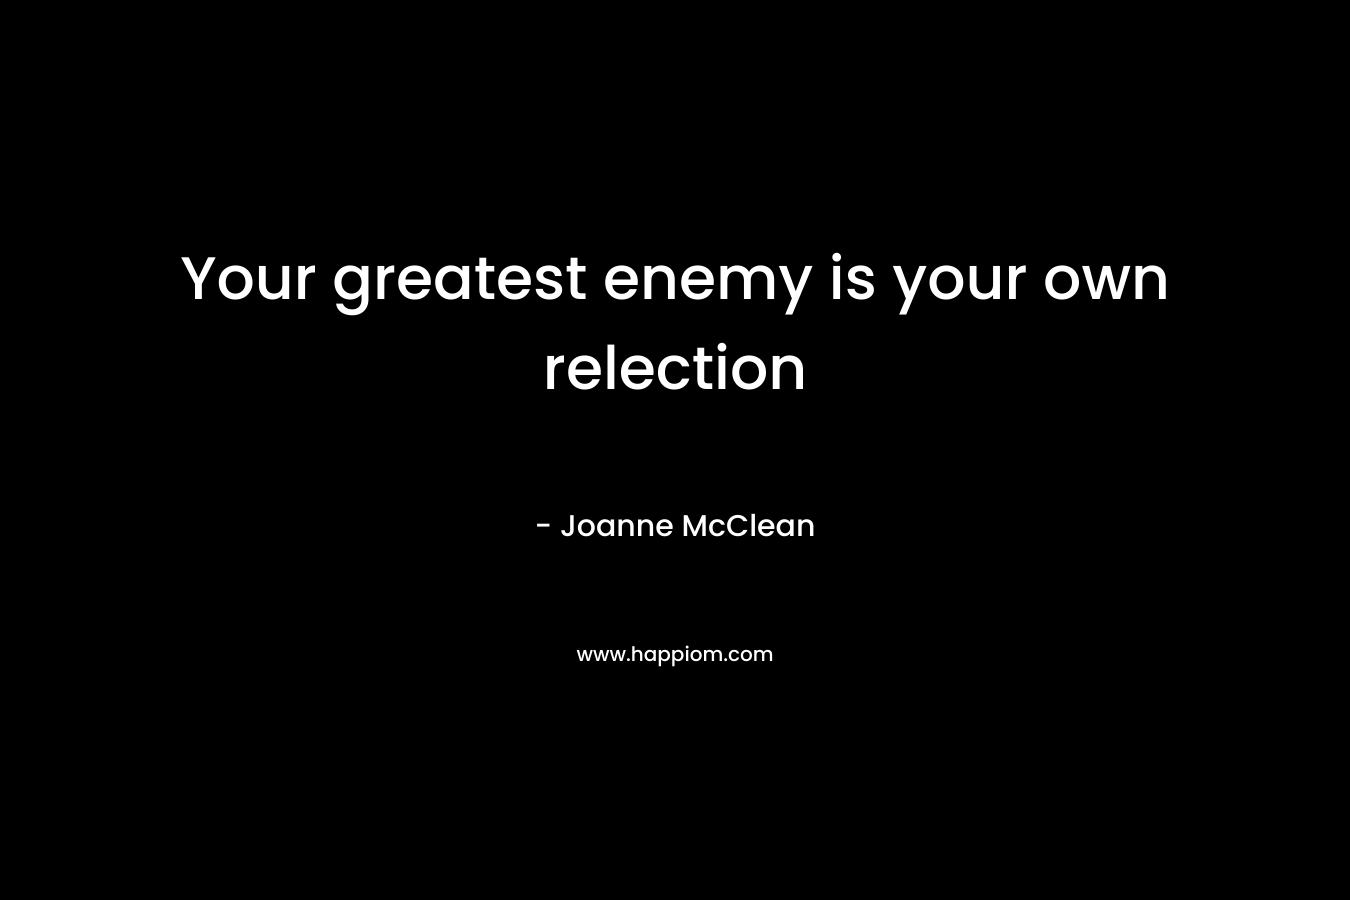 Your greatest enemy is your own relection